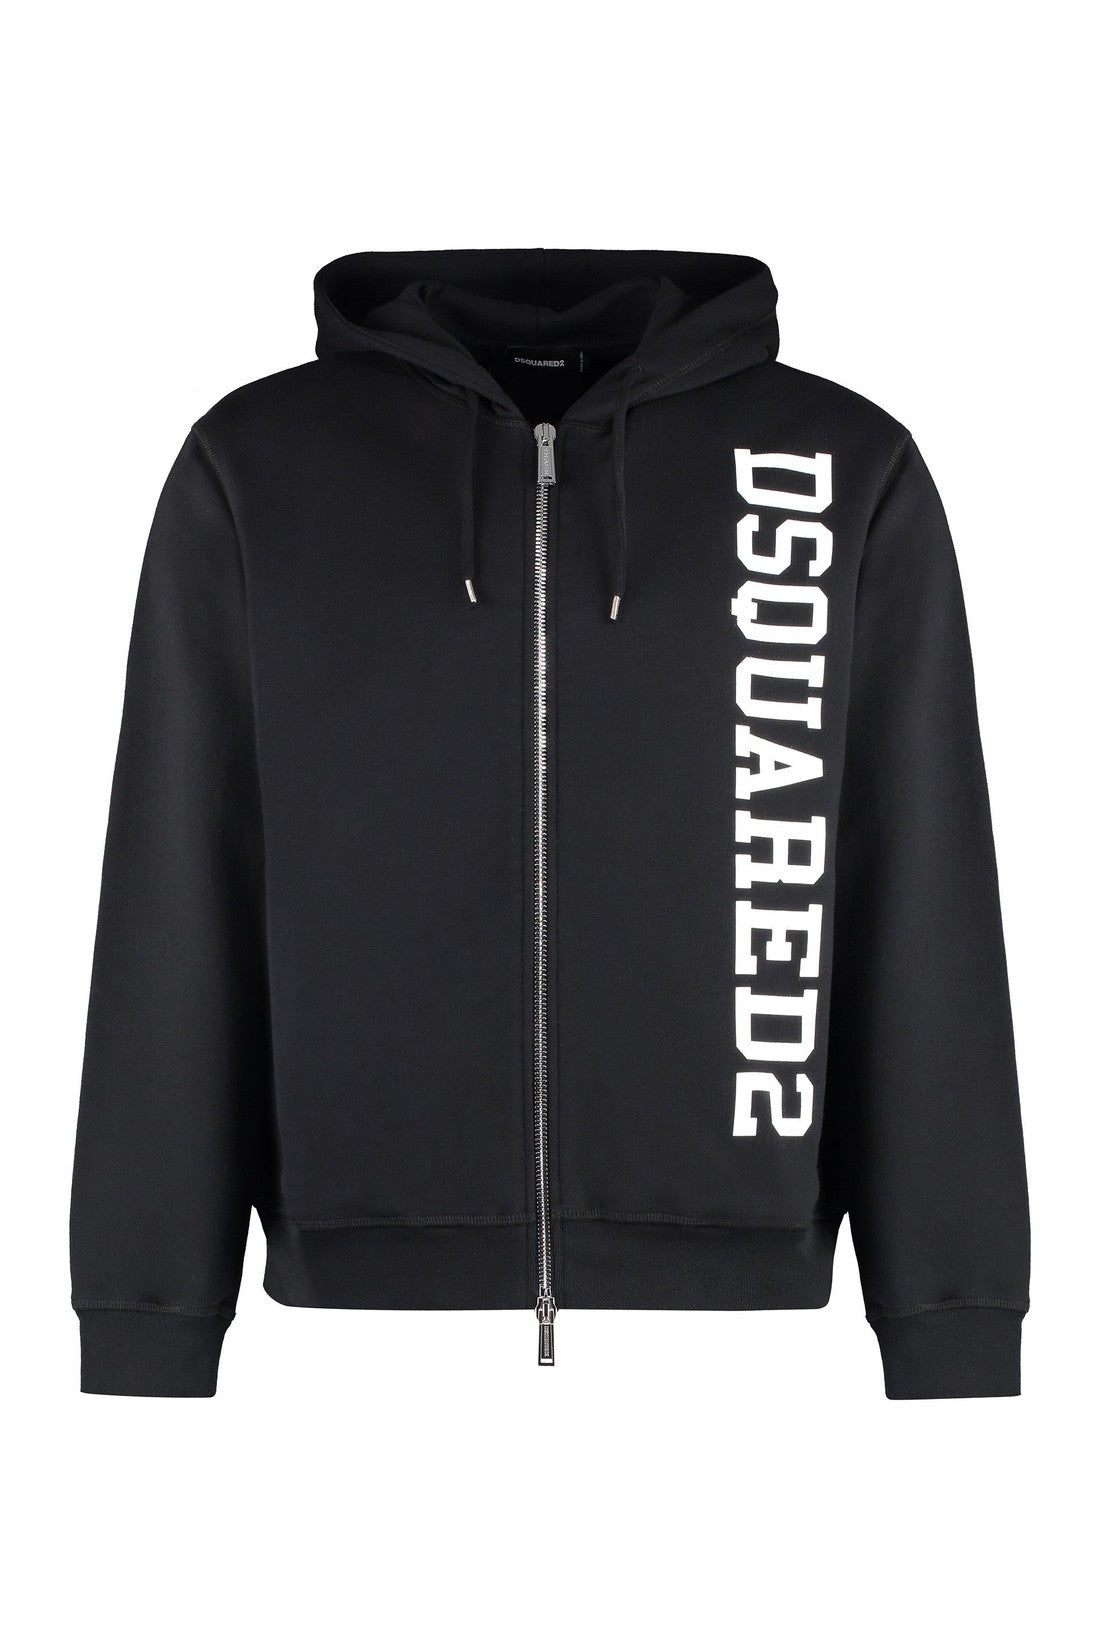 Dsquared2-OUTLET-SALE-Full zip hoodie-ARCHIVIST